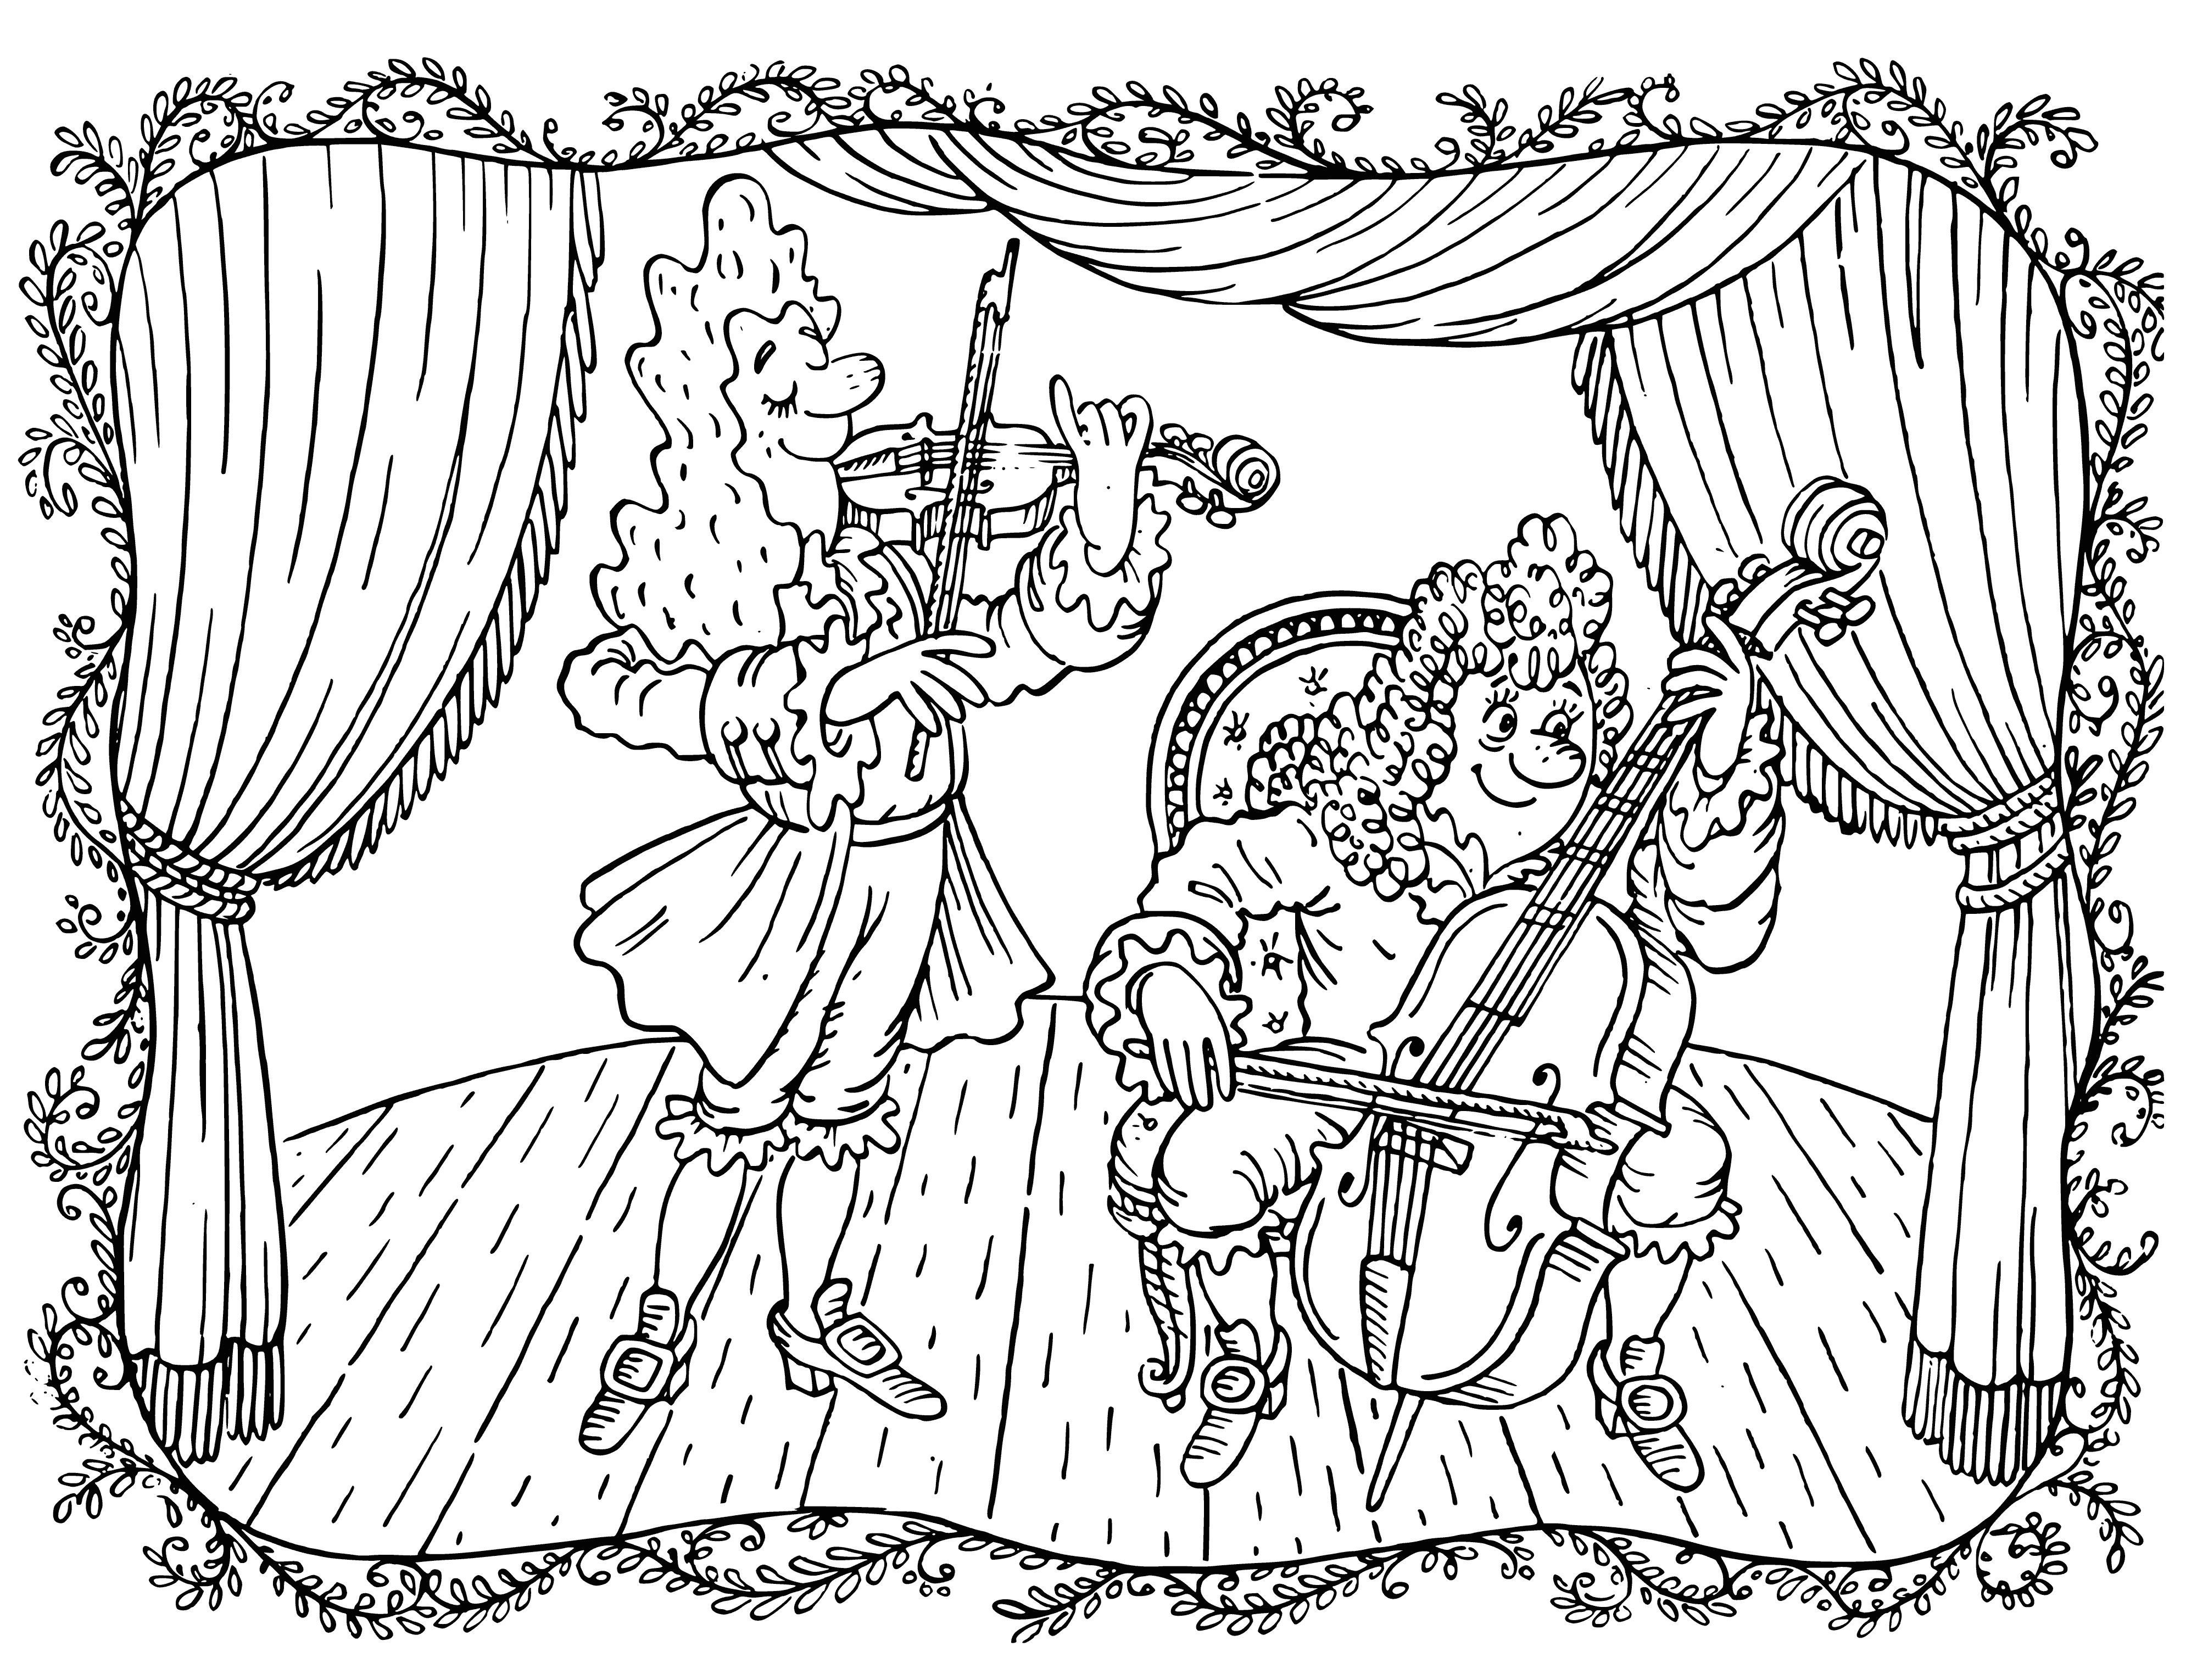 coloring page: String ensemble plays lively concert in black suits & ties in spotlit curtain-works their magic on violins, cellos, & double bass.